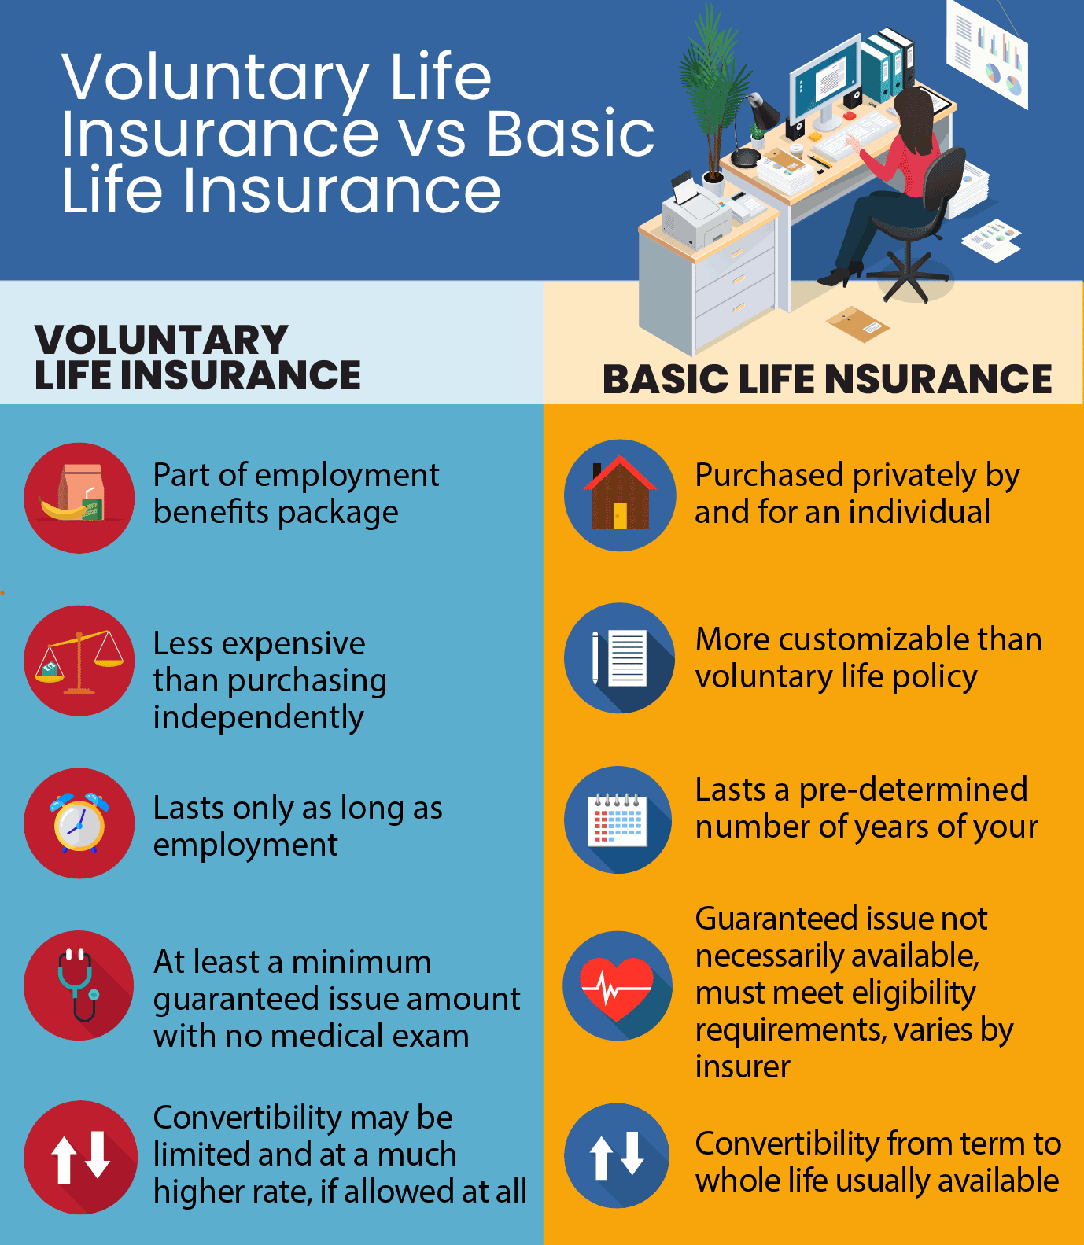 Basic Life Insurance: What Is It?